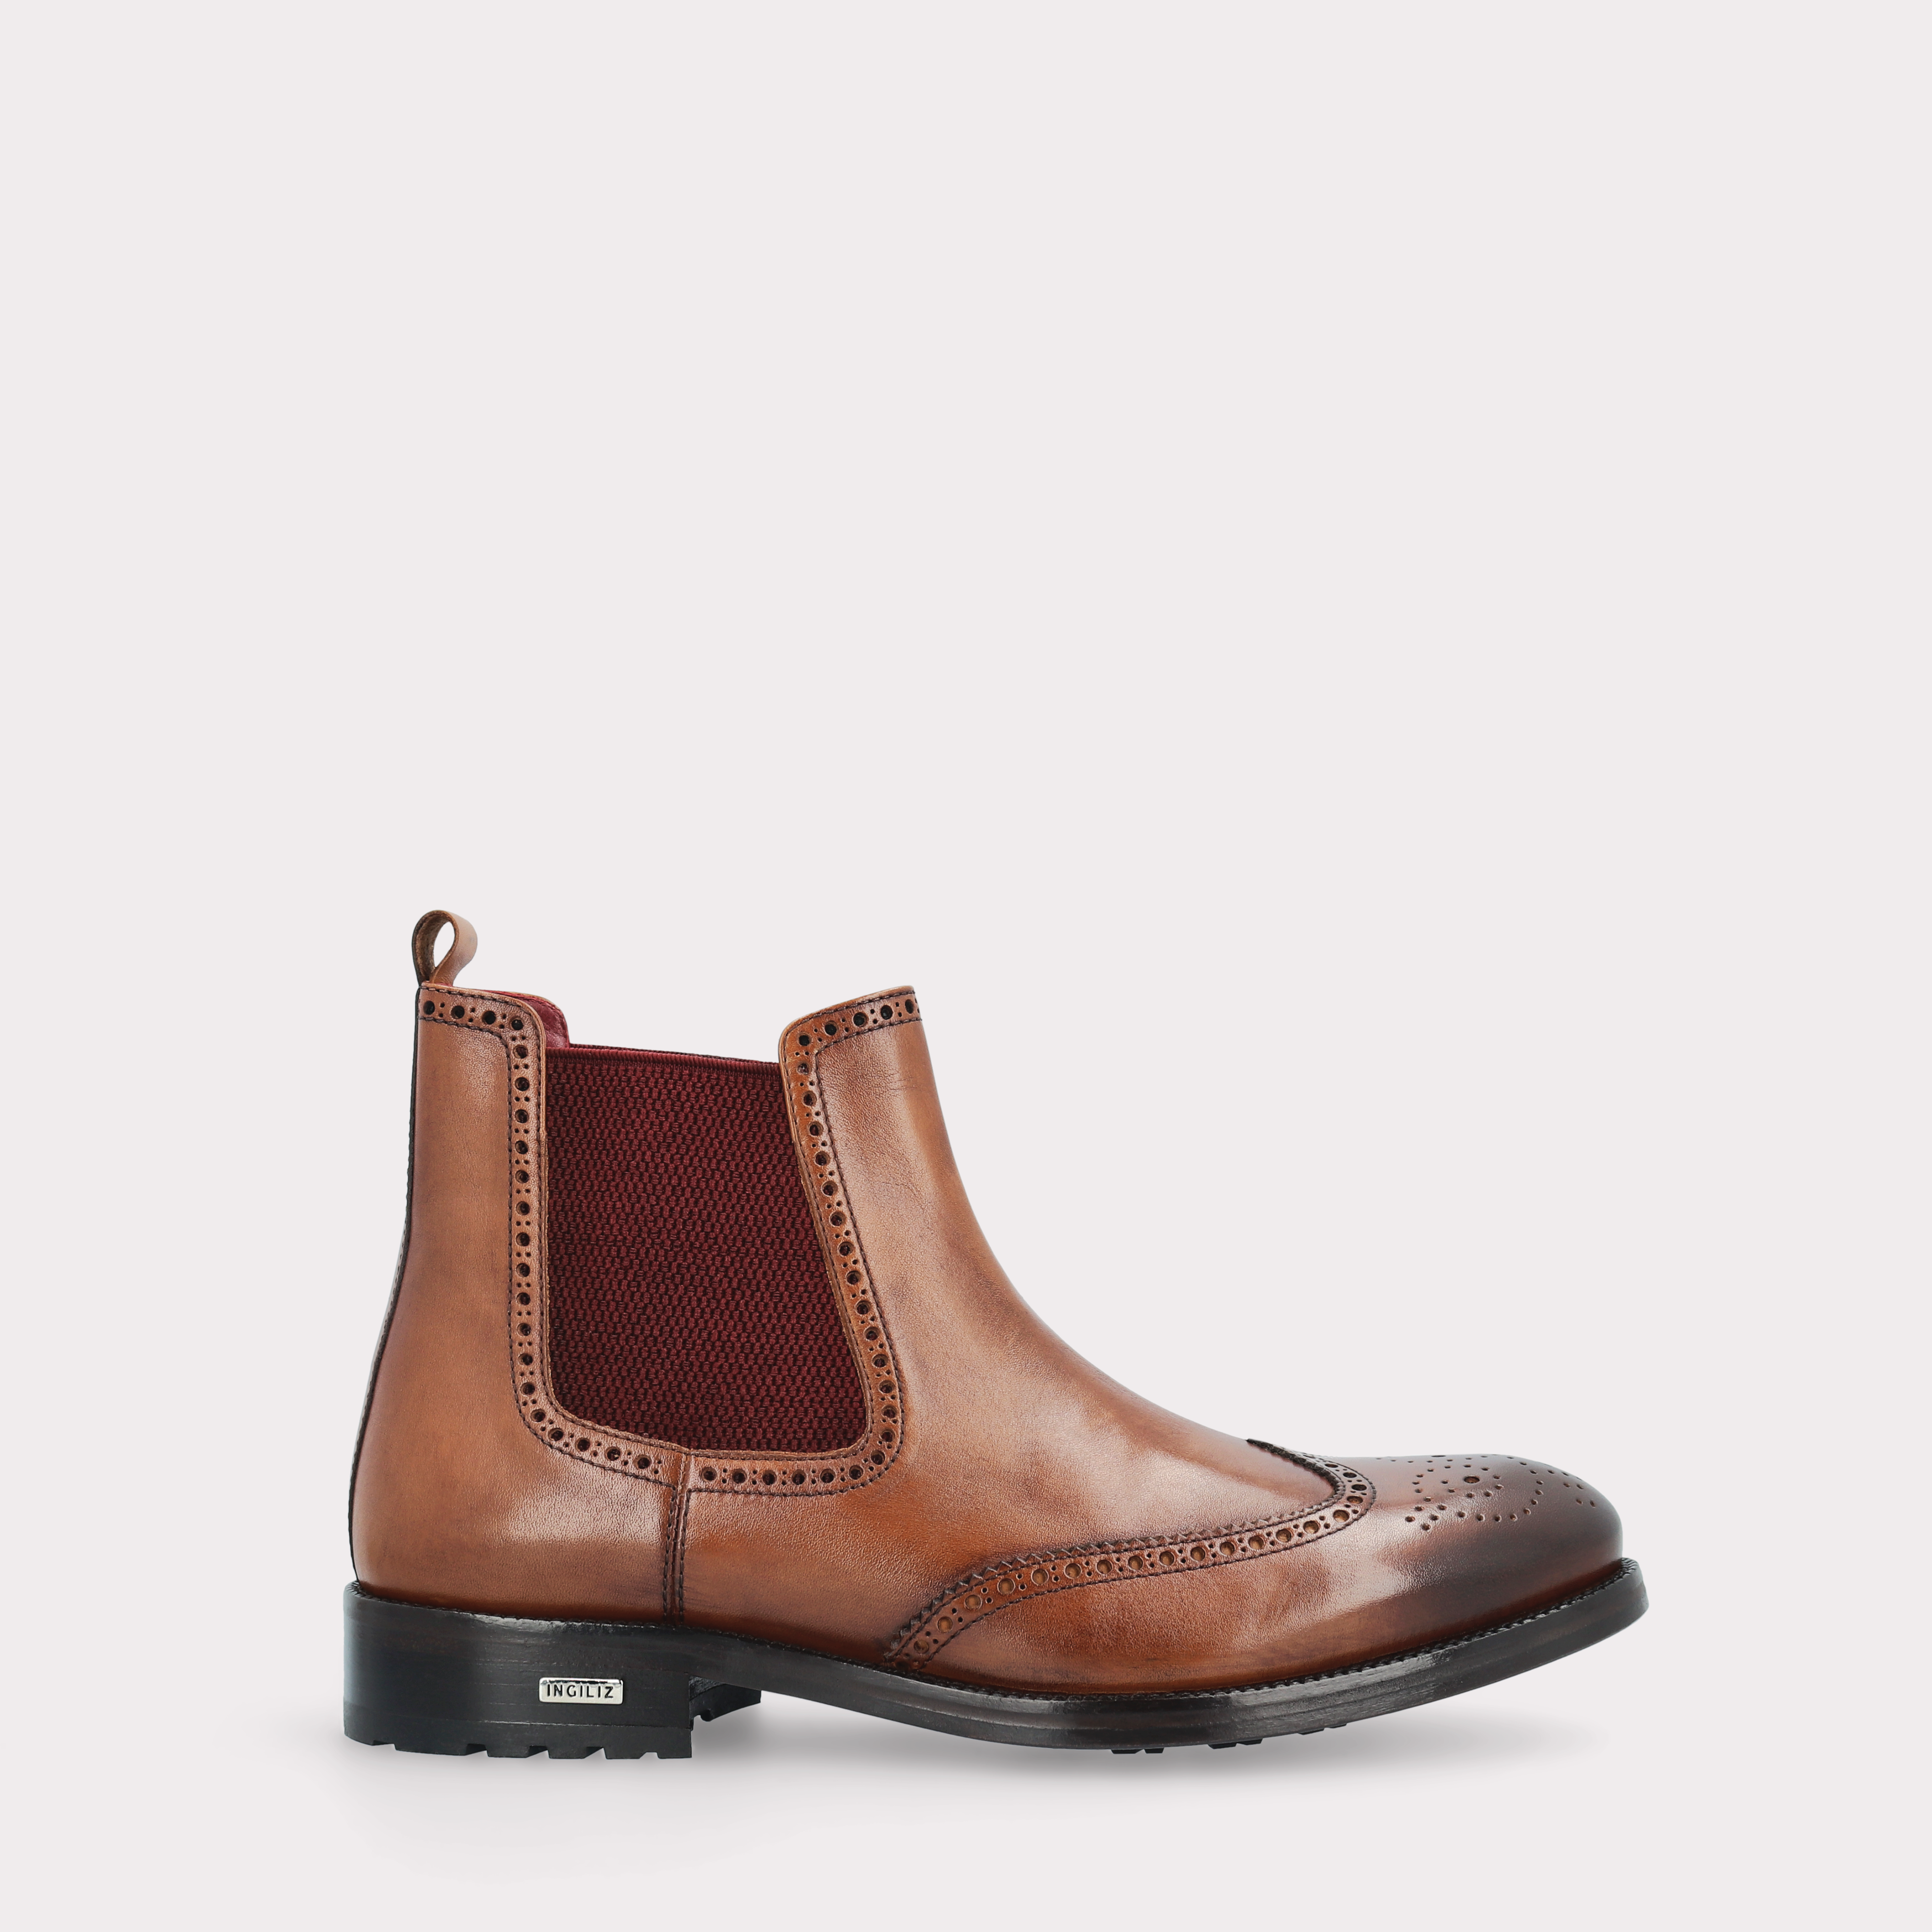 MODENA 01 brown leather chelsea boots with bordeaux elastic